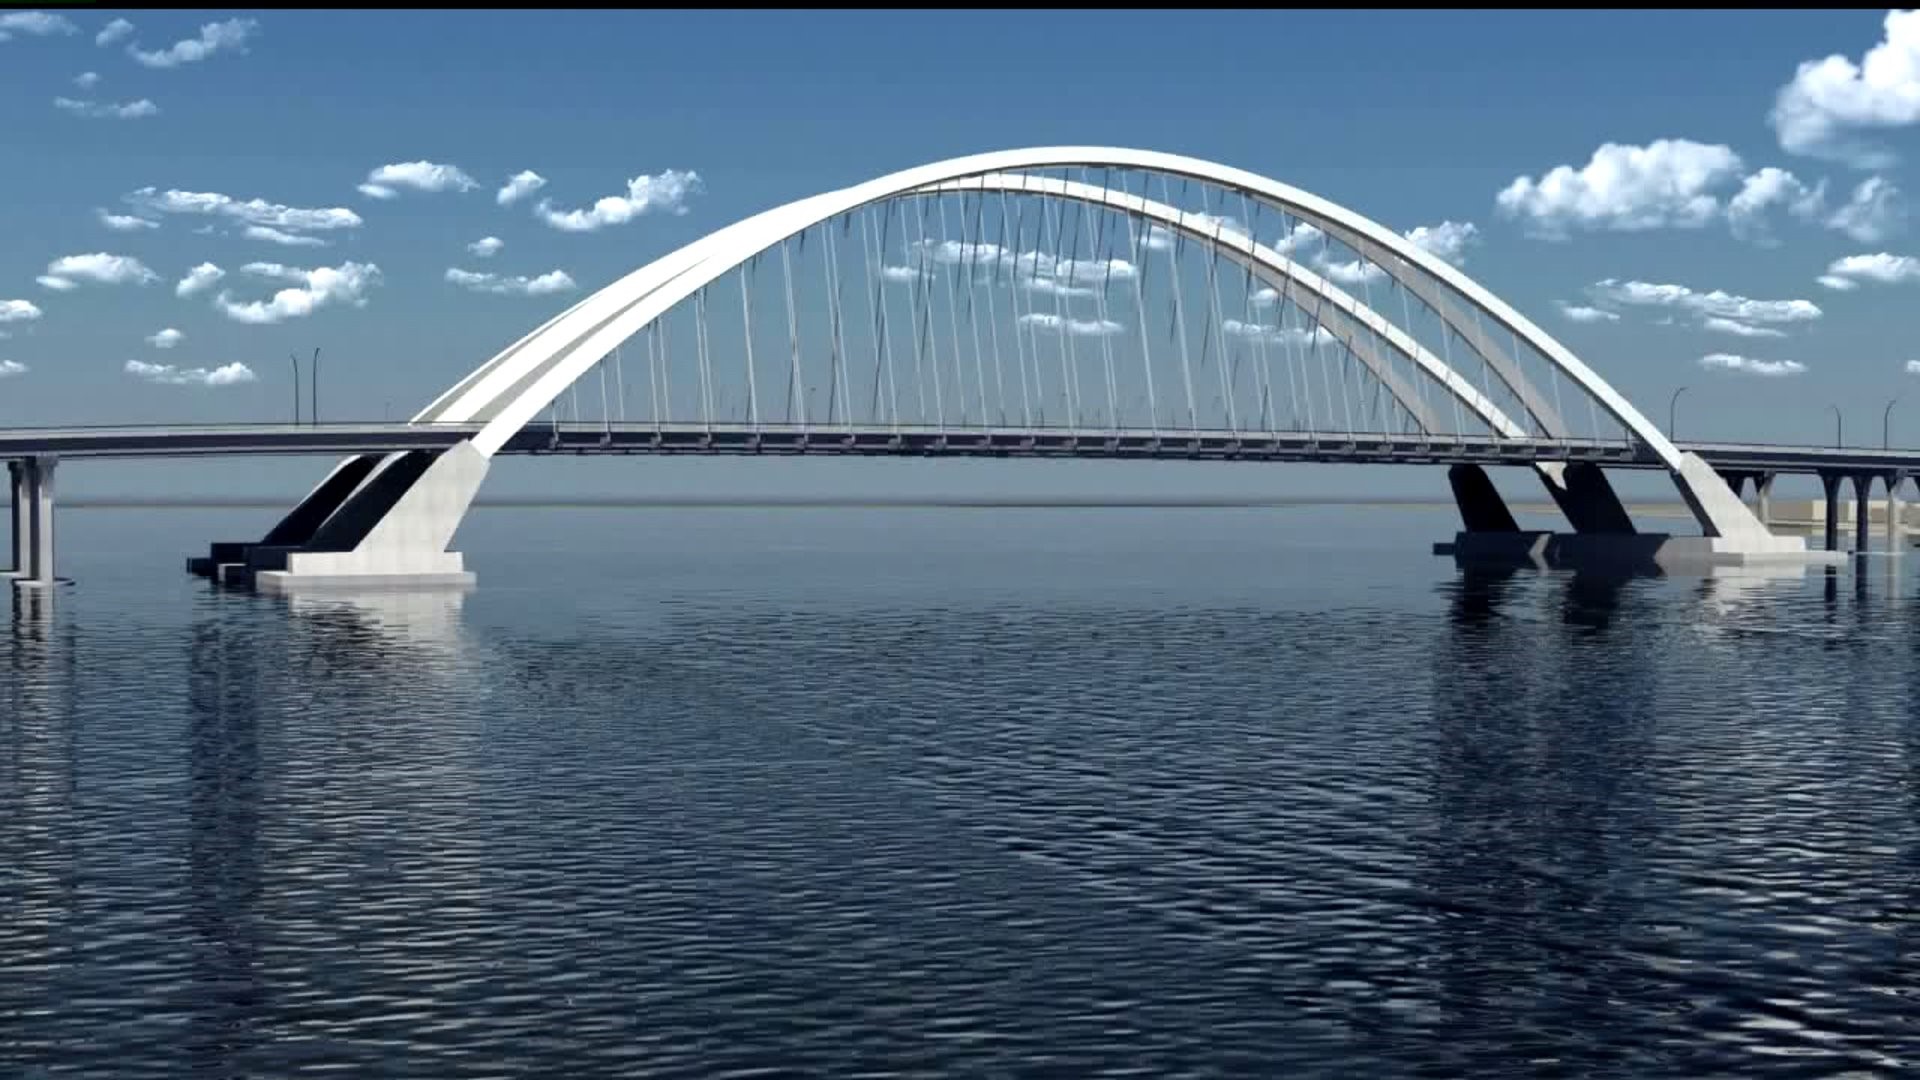 I74 Bridge Arches to be delivered this week